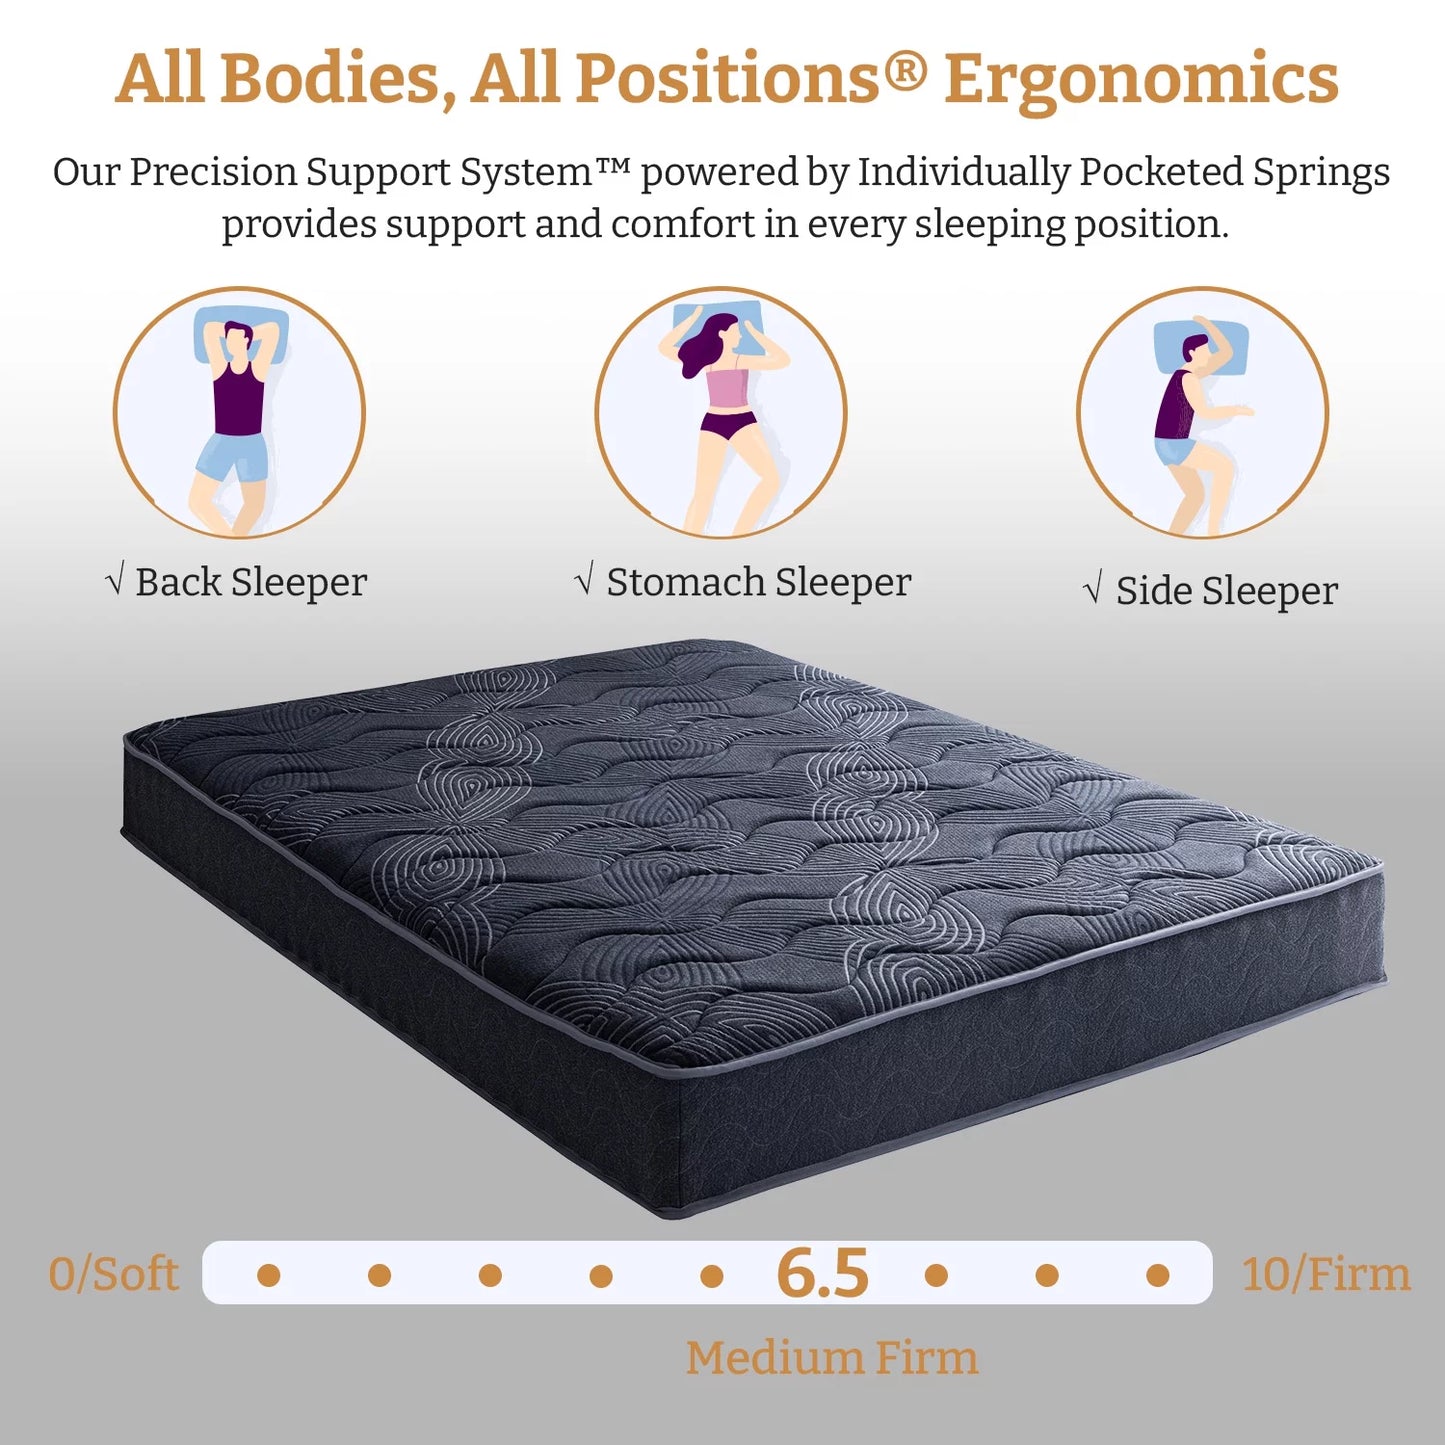 9 inches King Mattress, Memory Foam Hybrid Mattress in A Box for Pain Relief & Cool Sleep,Made in USA